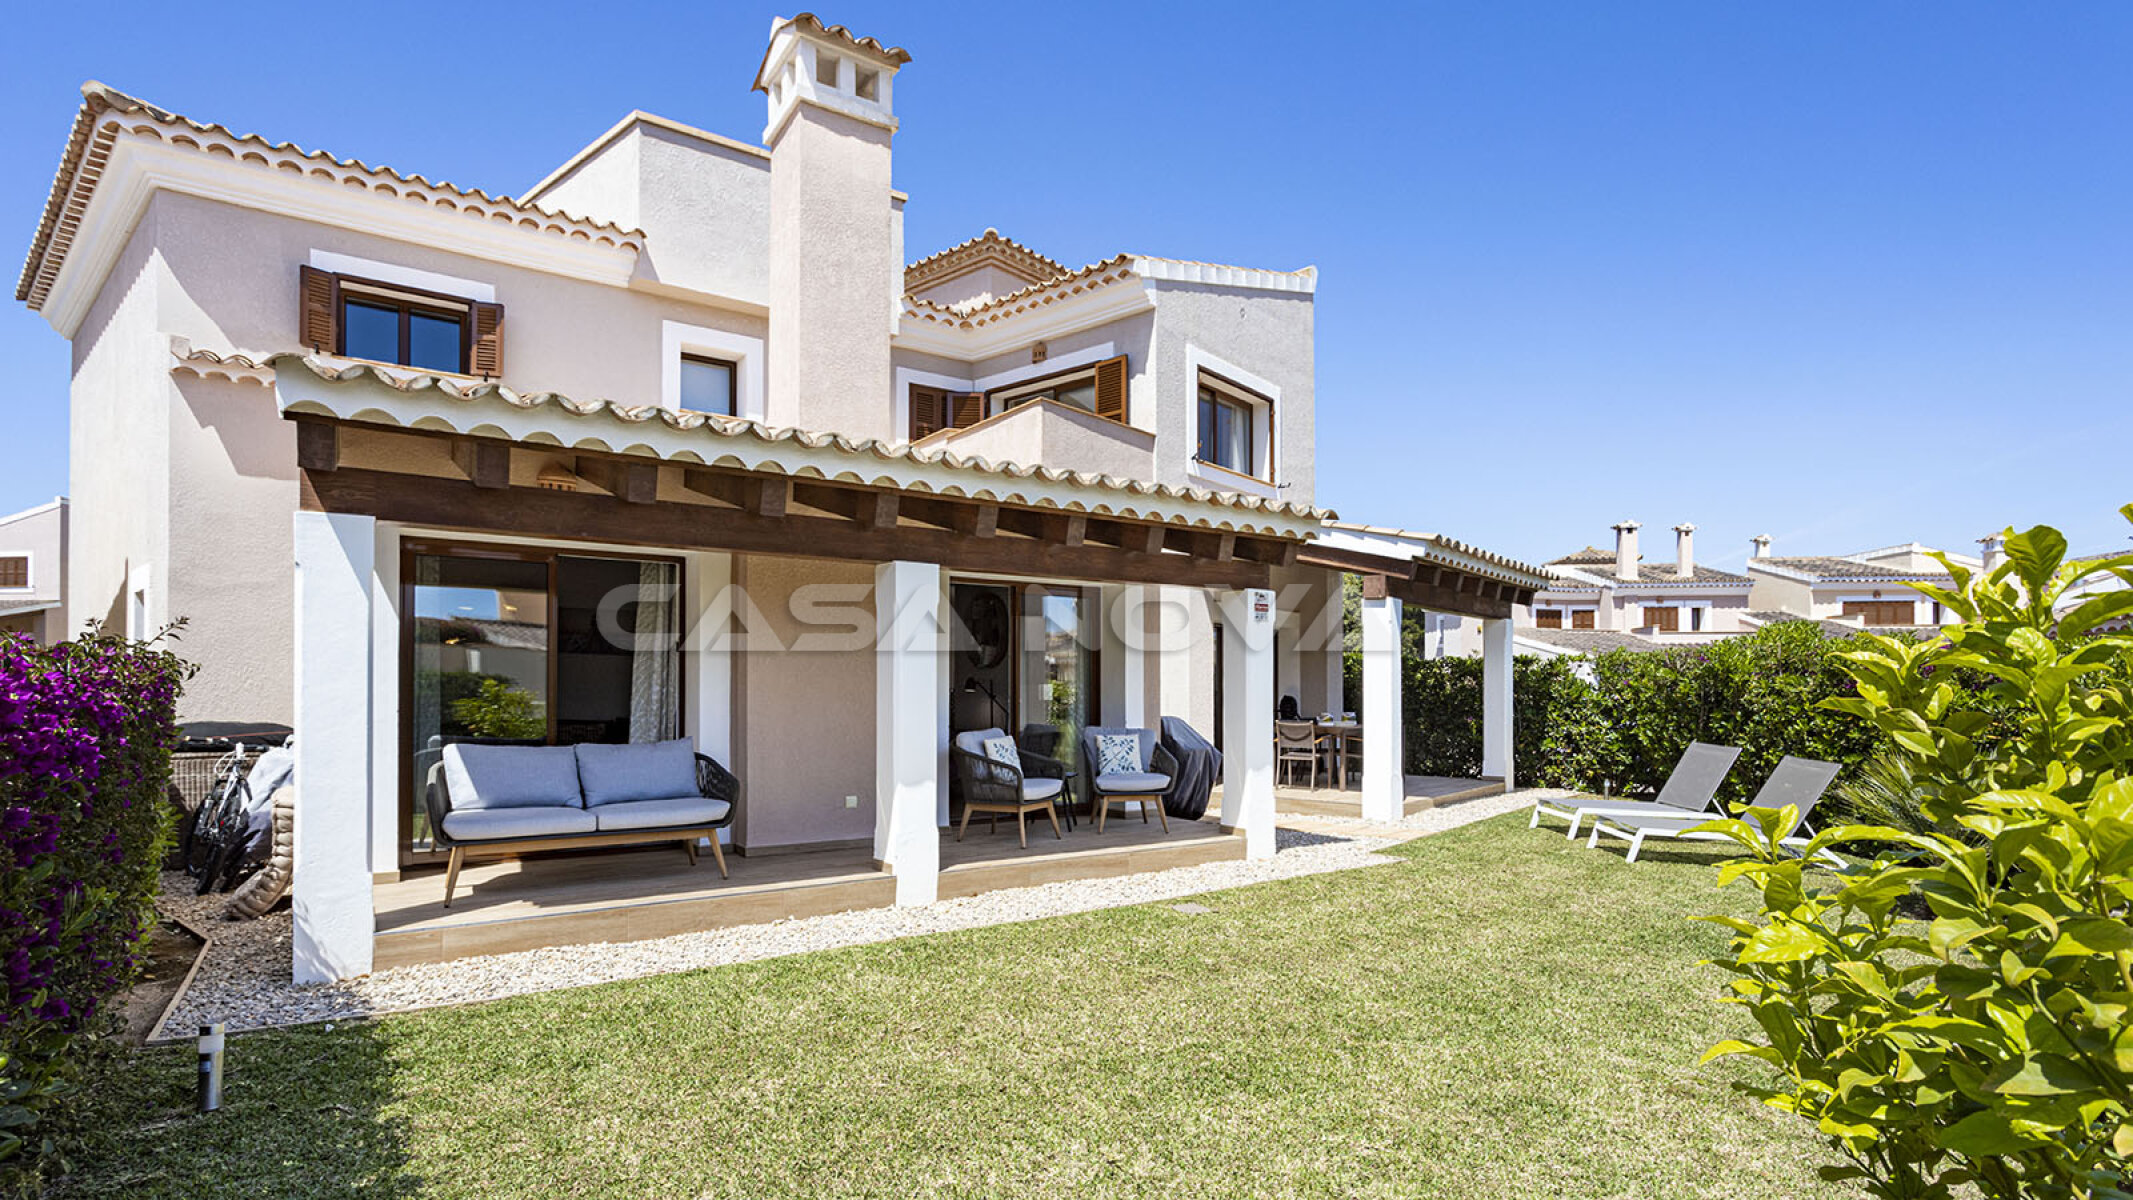 Charming golf villa in an exclusive residential area